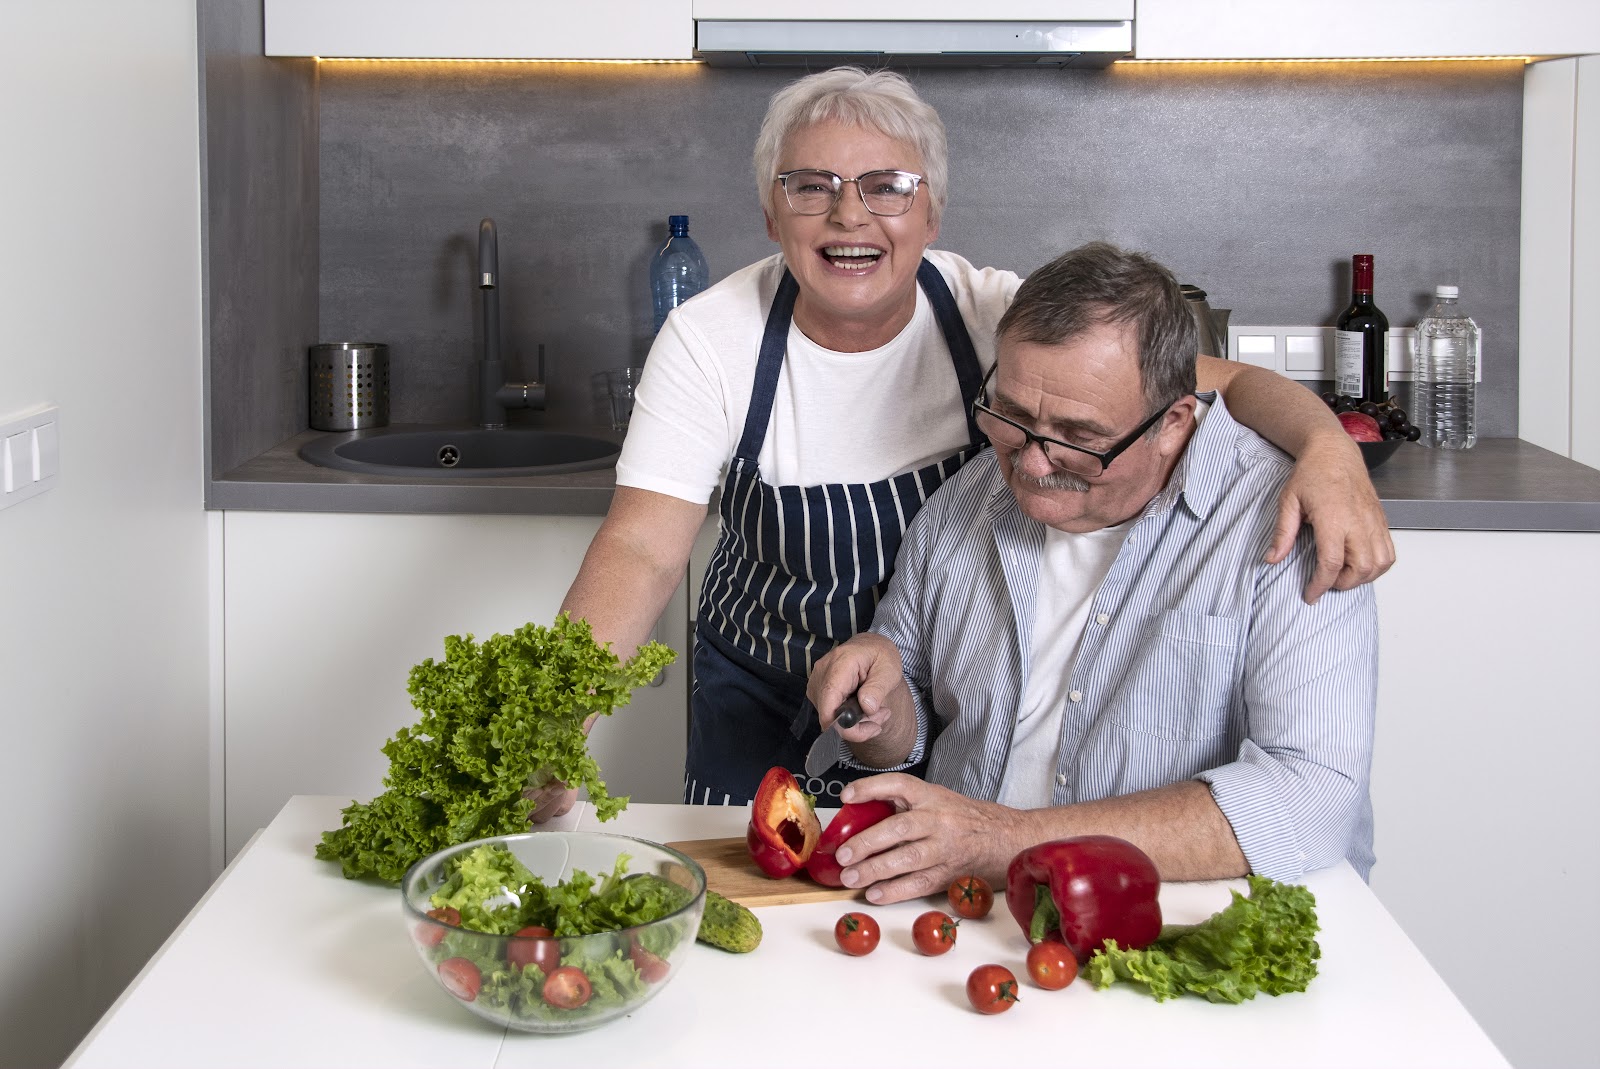 older woman and man cutting vegetables in kitchen